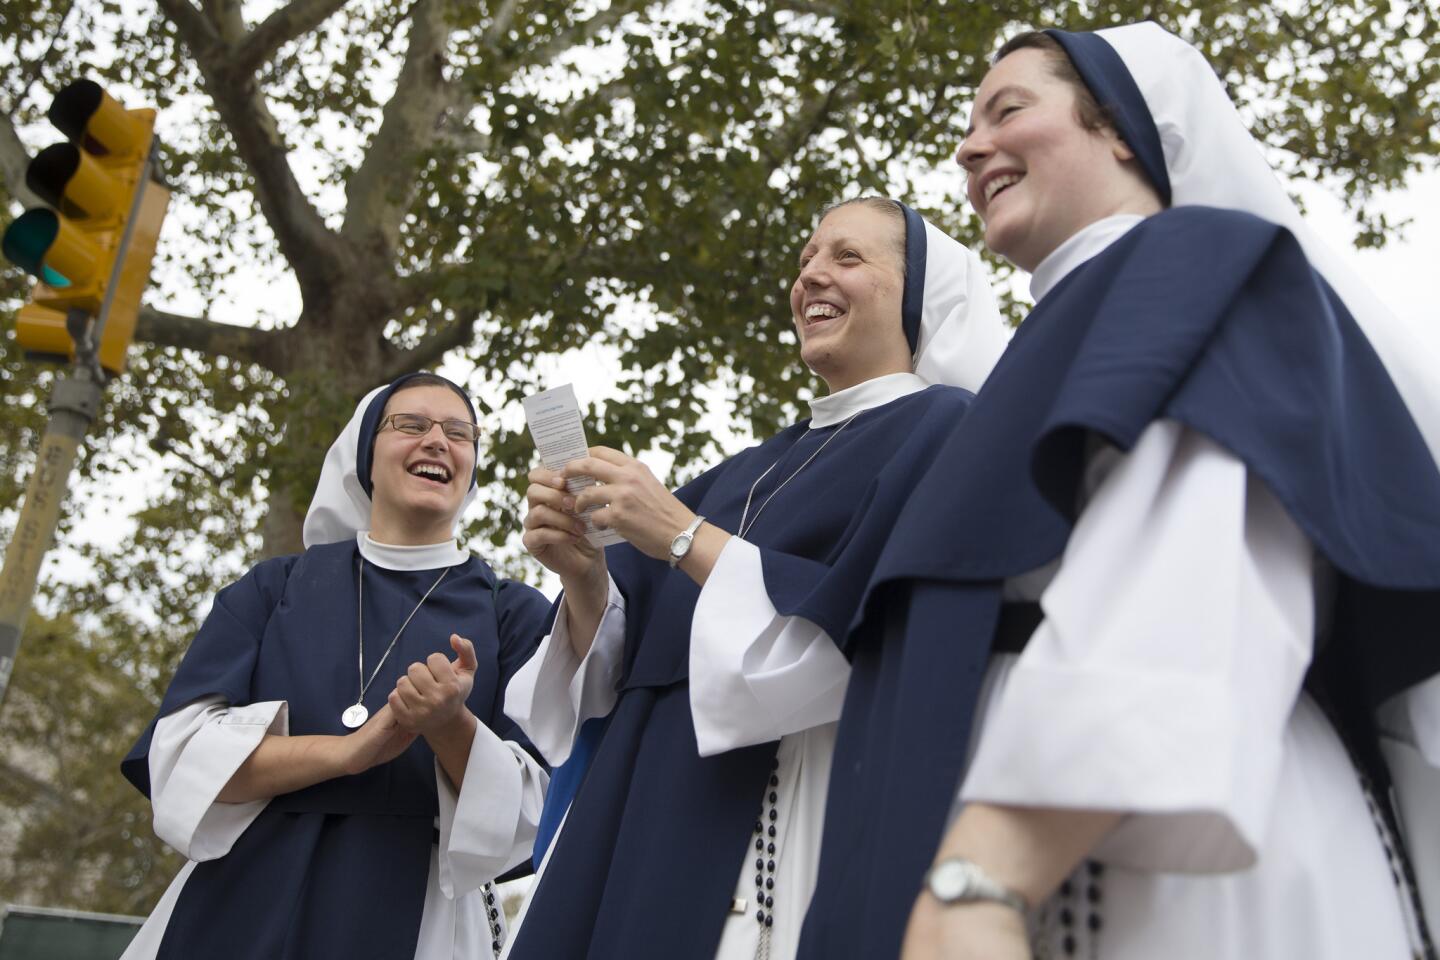 Sister Beatrice, center, of The Sisters of Life, of New York City, smiles as she holds her ticket by a checkpoint as they arrive for a Mass to be celebrated by Pope Francis, Sunday, Sept. 27, 2015, in Philadelphia.